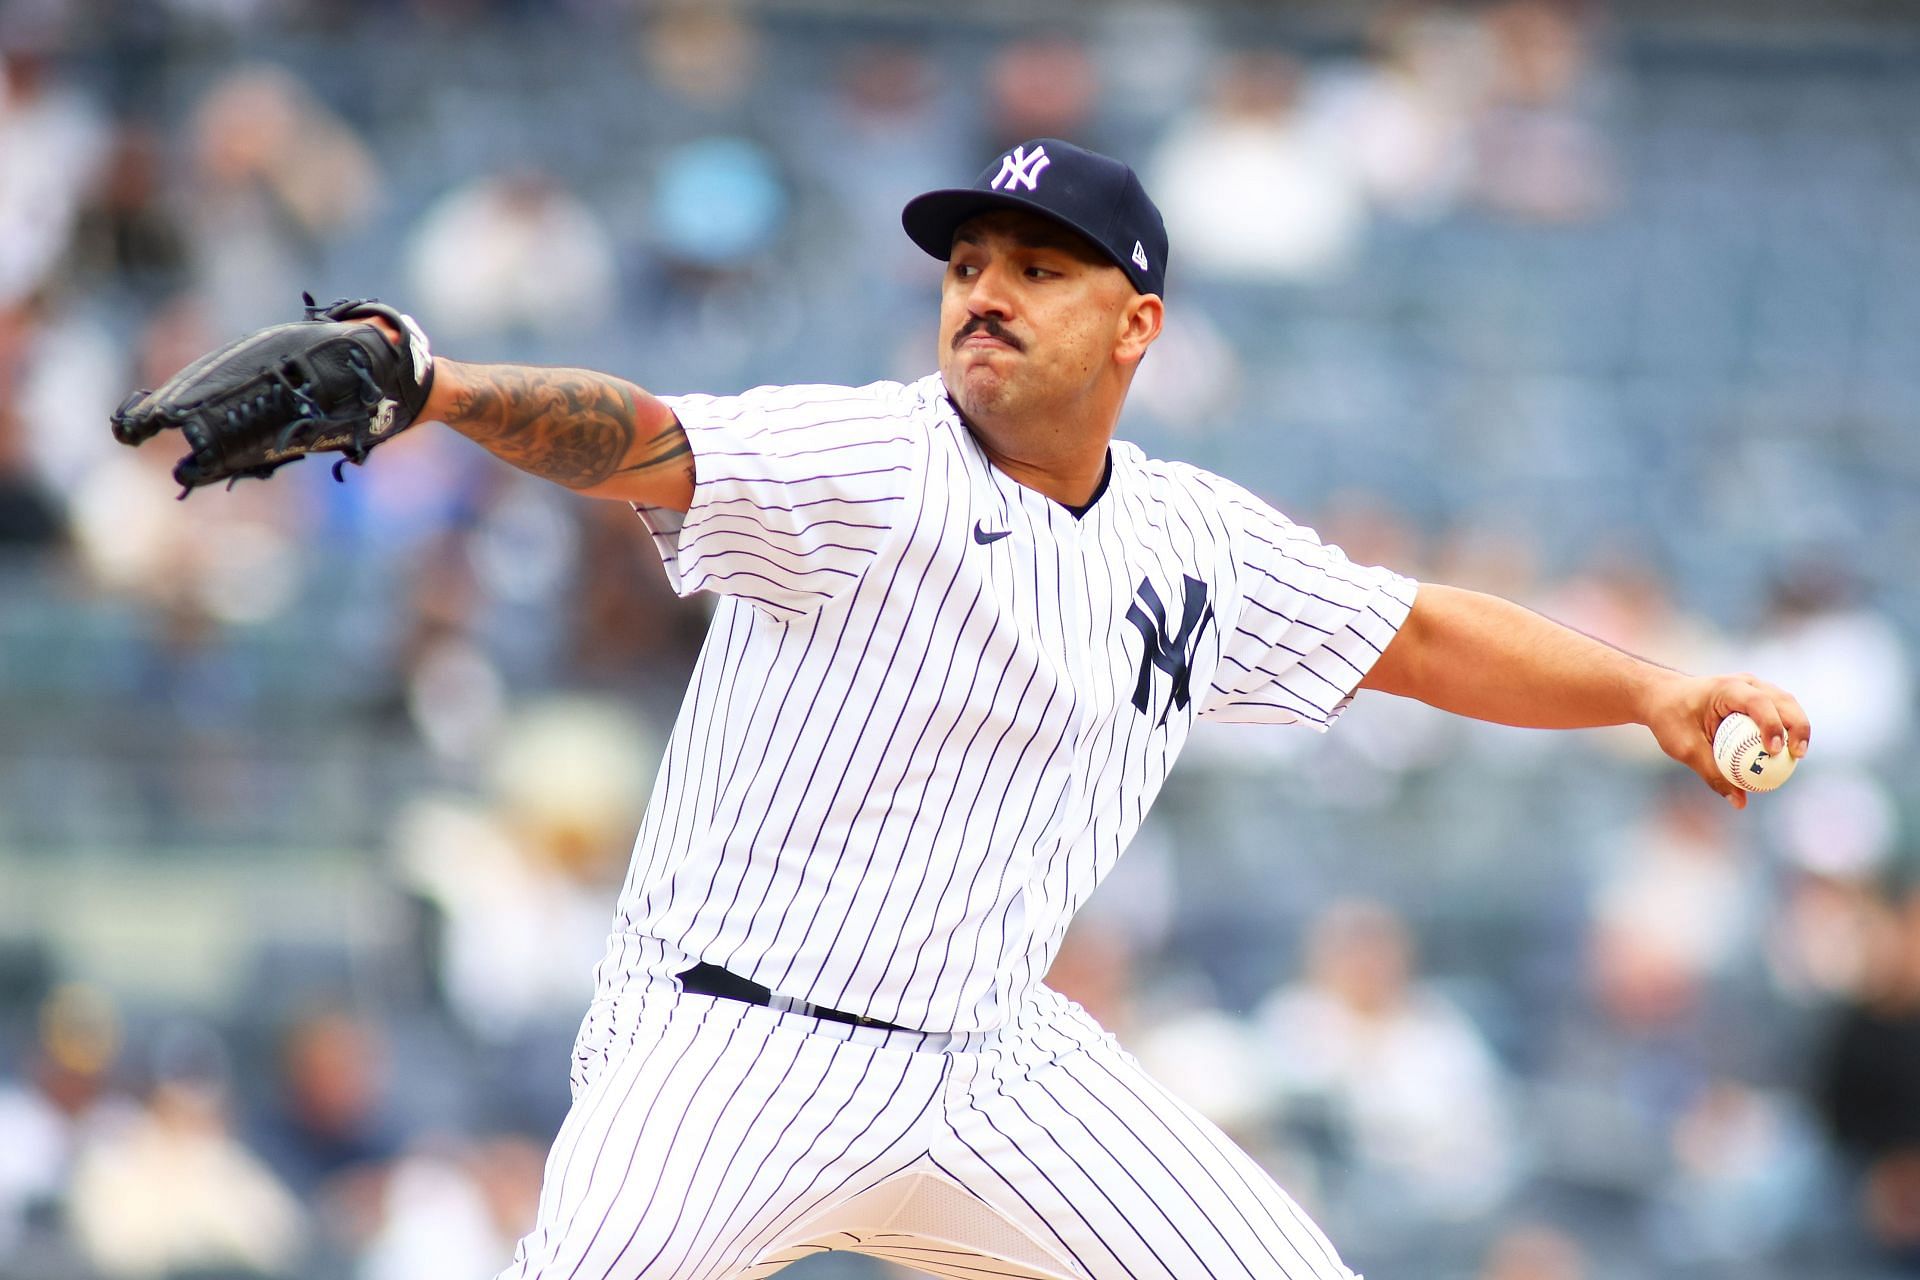 New York Yankees left handed specialist Nestor Cortes is on his way to establishing himself as one of the best relievers in Major League Baseball